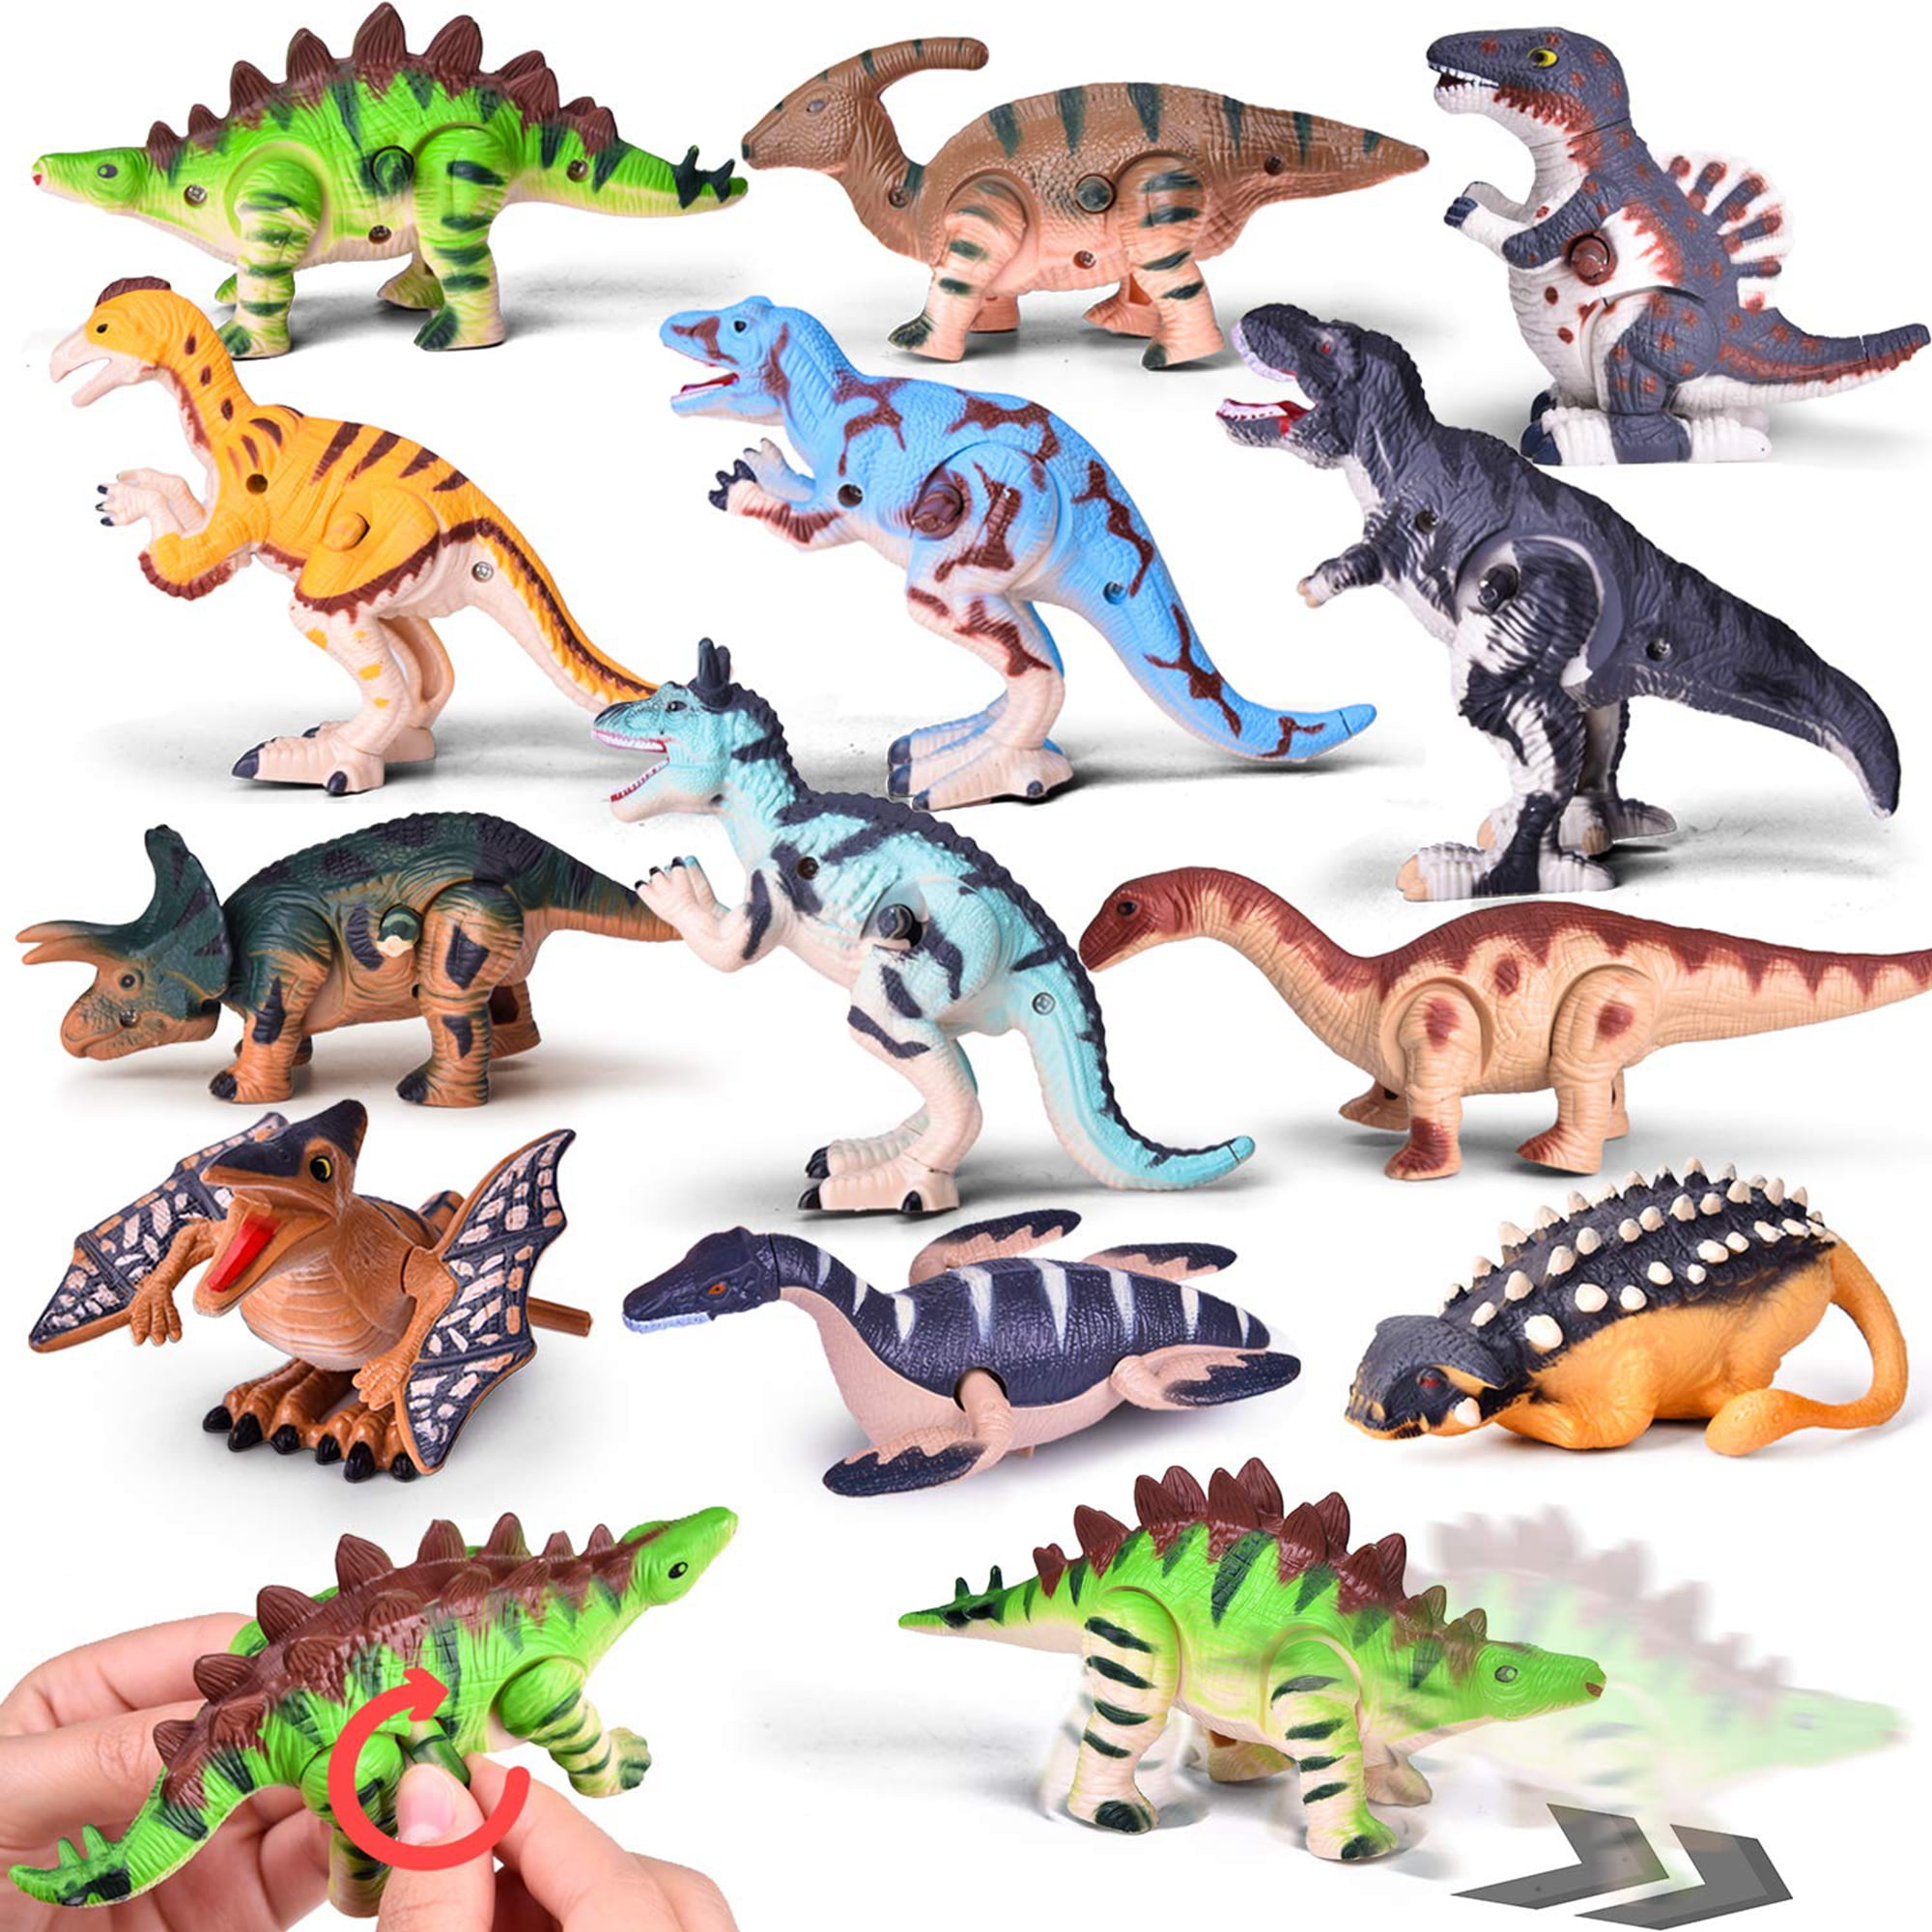 12 PVC Plastic Dinosaurs Play Toy Animals Action Figures Kids Party bag loot 